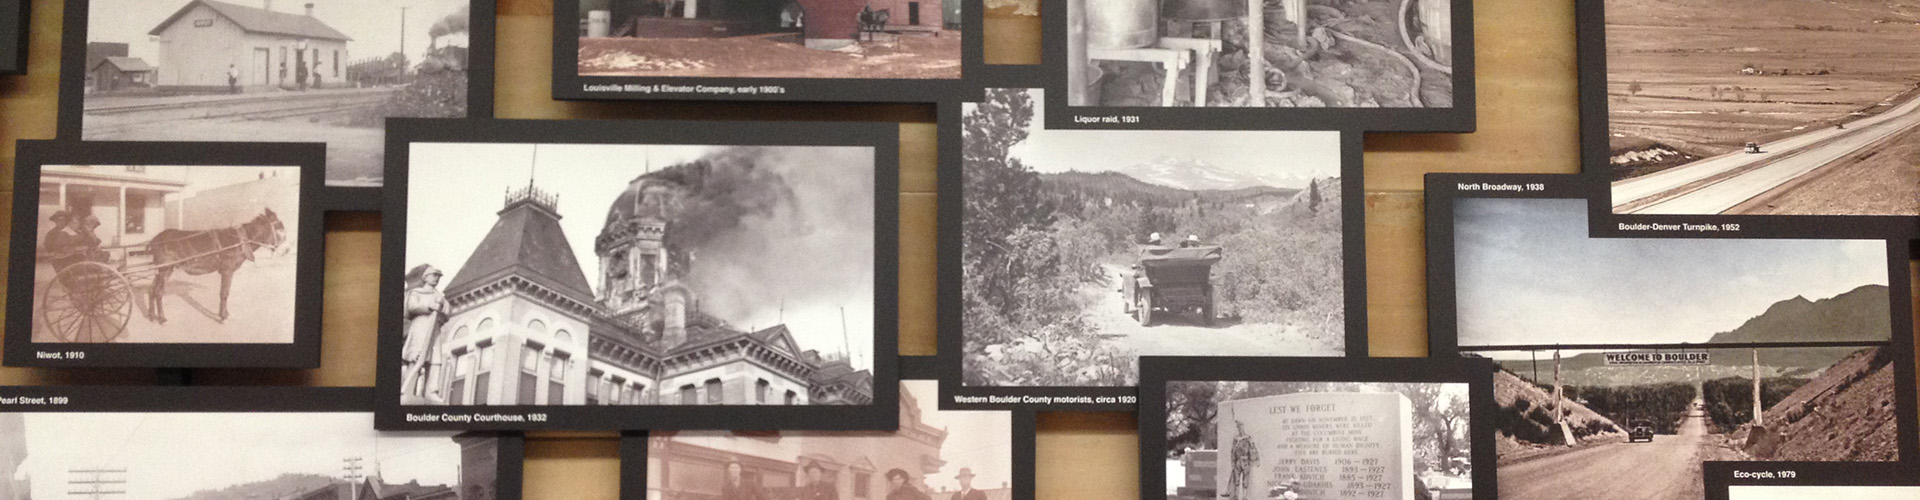 Collage of historic Boulder County photos